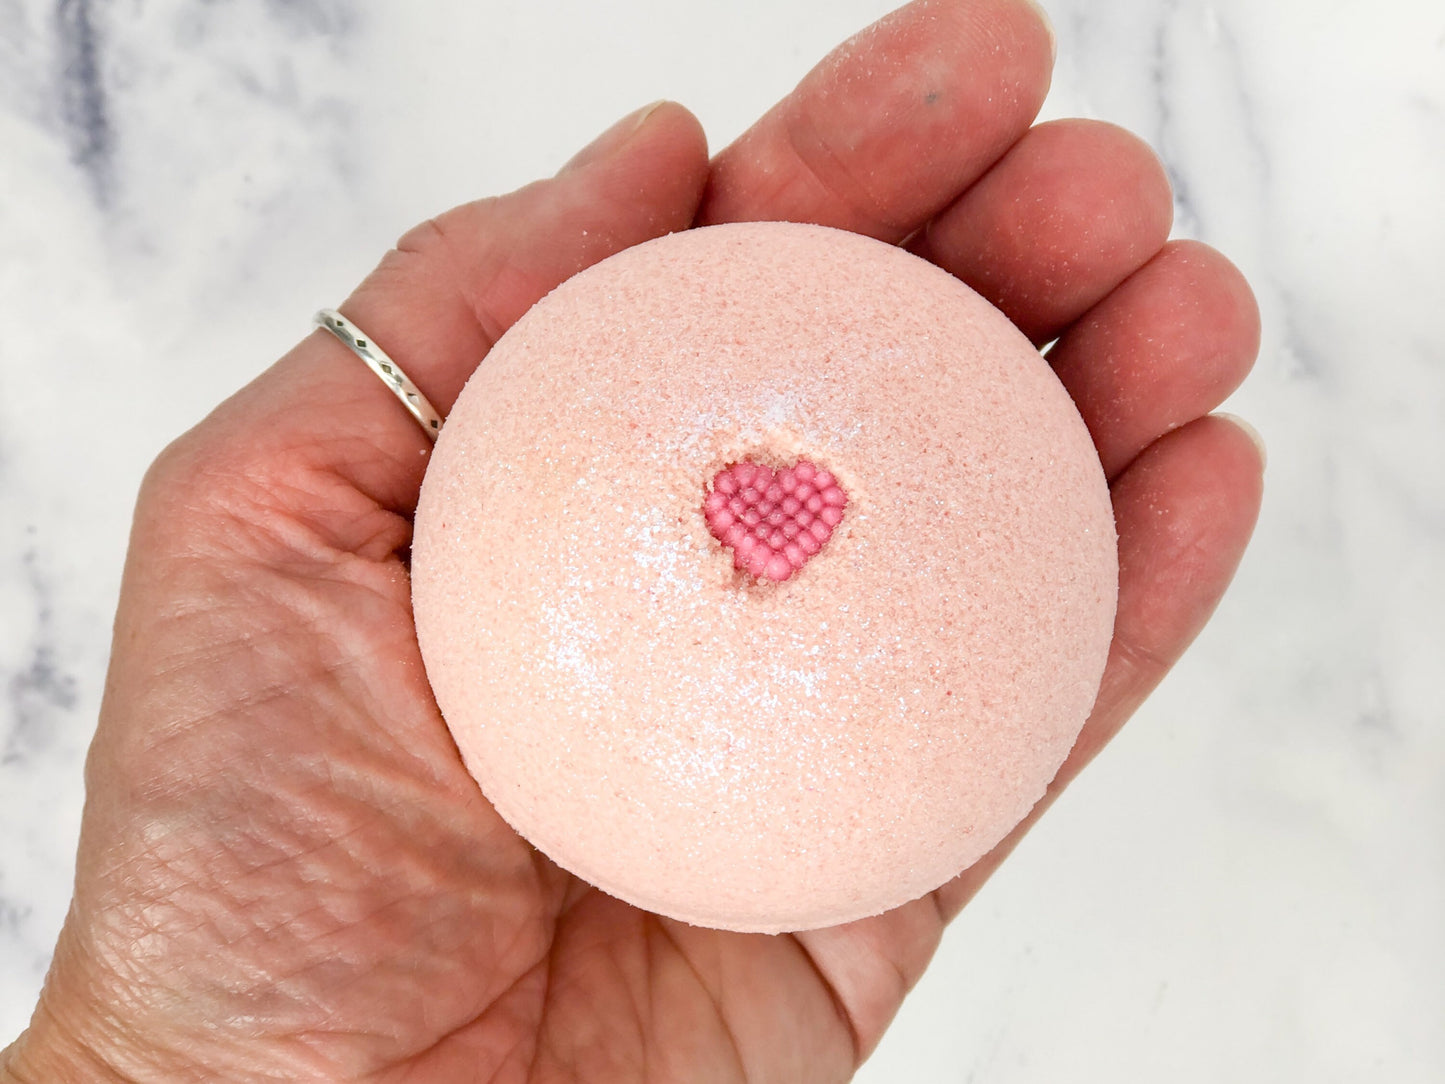 Light pink/peach round bath bomb with mini candy heart and iridescent glitter on palm of hand to show scale.  Marble countertop in background